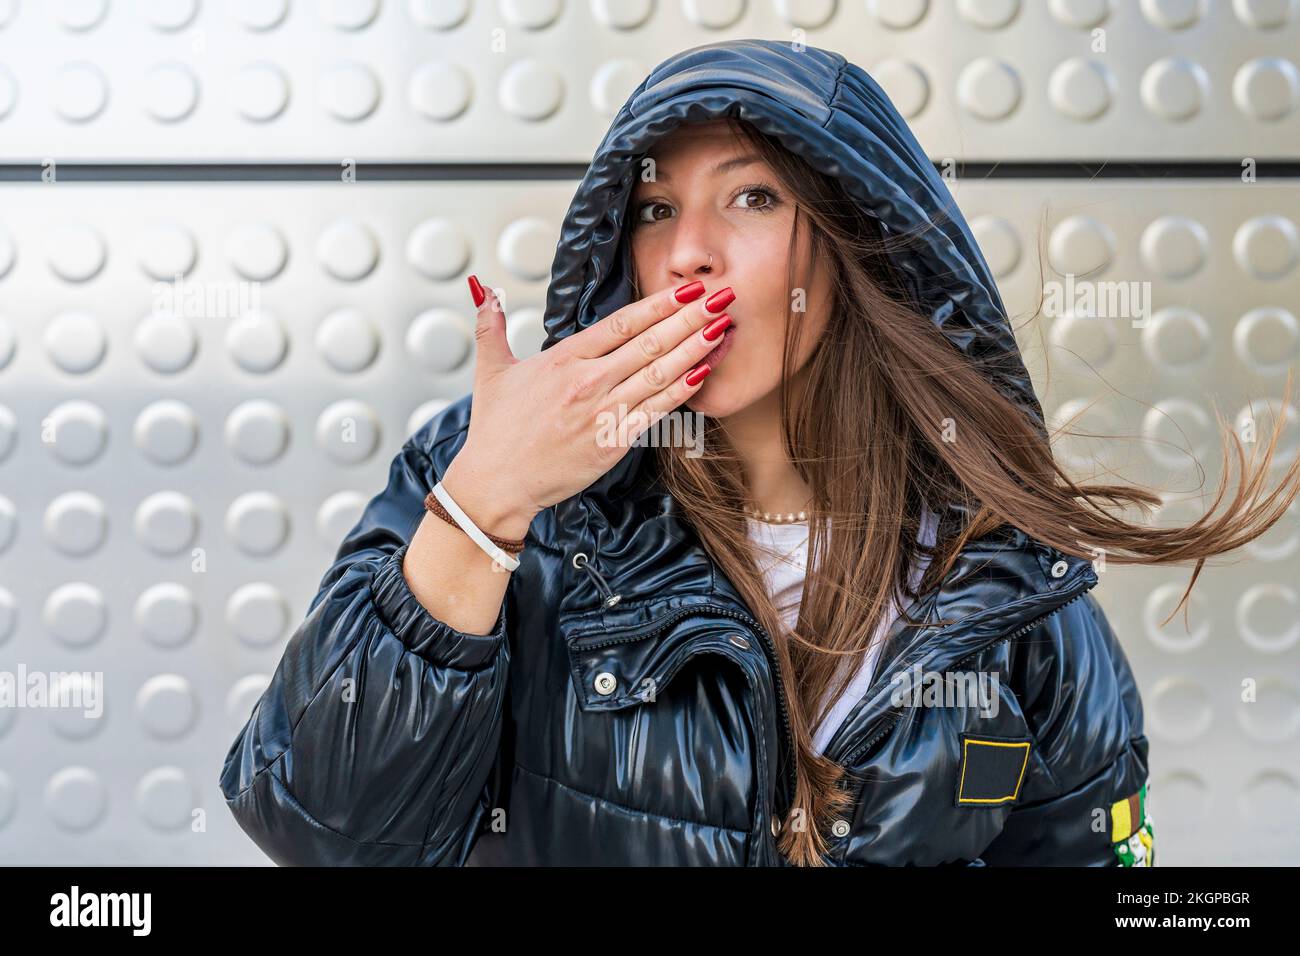 Woman covering mouth with hand in front of metal wall Stock Photo